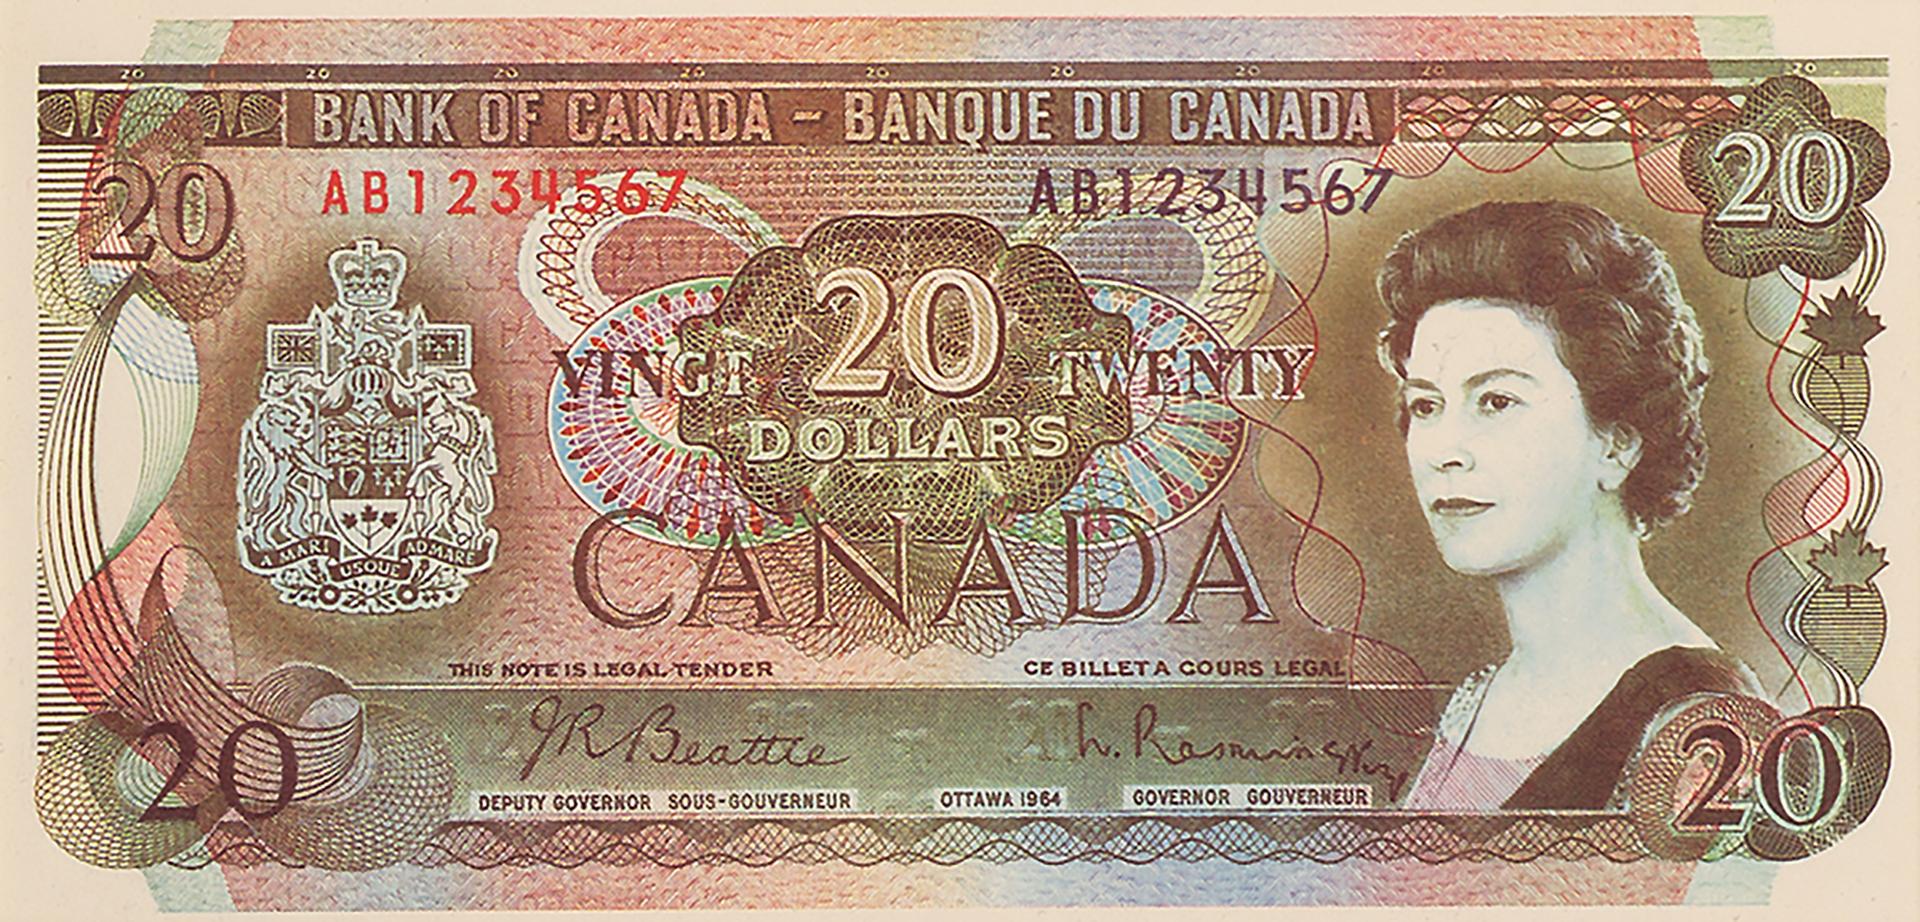 Bank notes, hand drawn models, 10 different designs in a slideshow format.